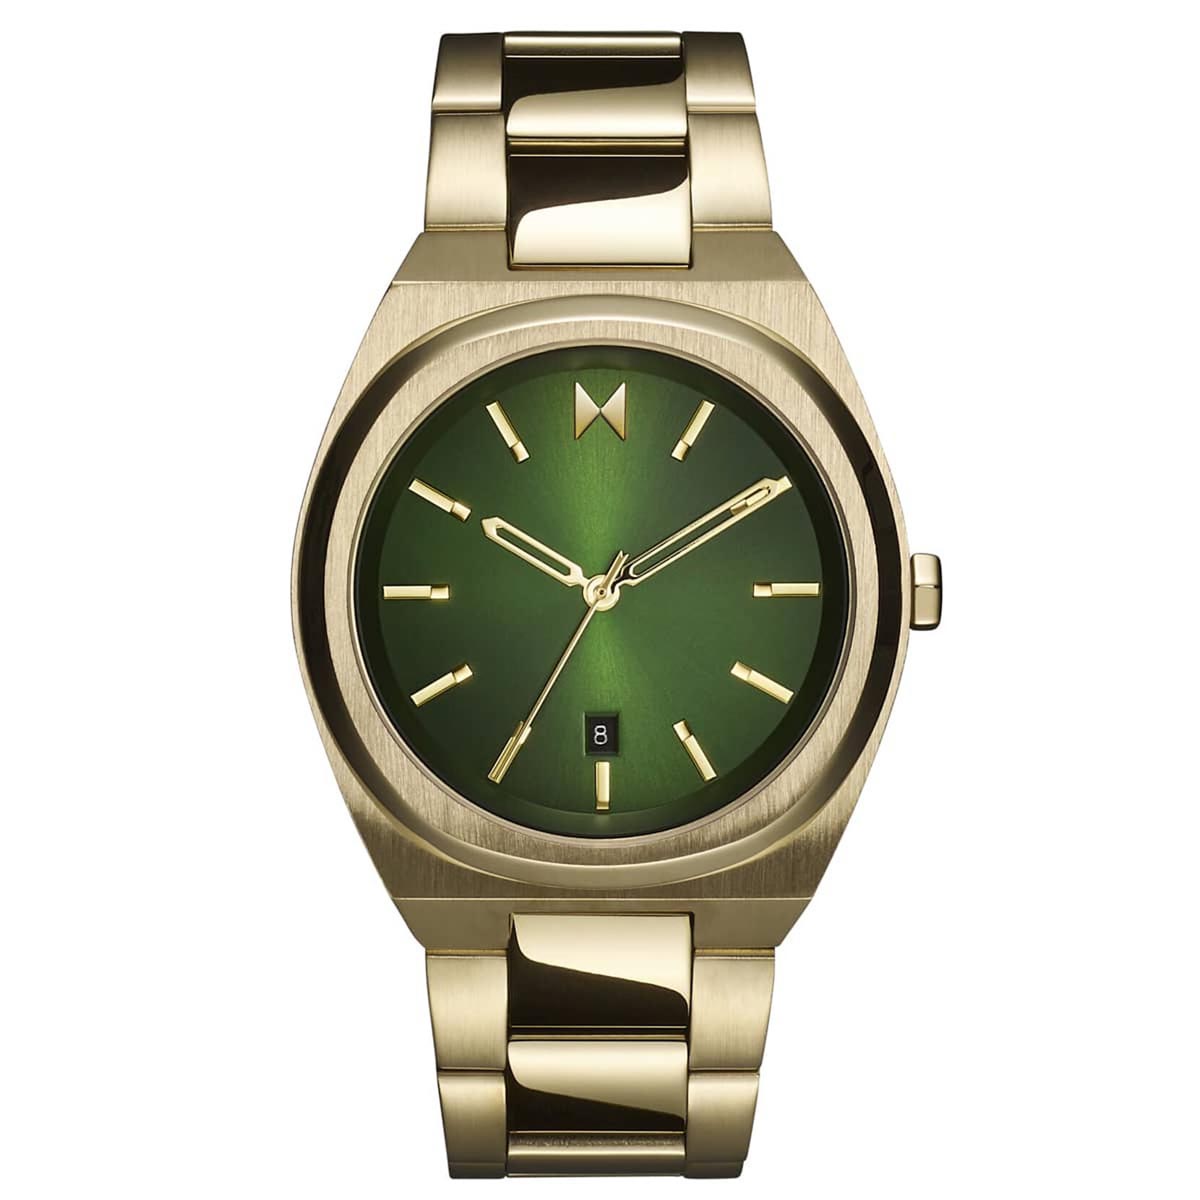 MVMT by Movado Odyssey II Mens Watch with Green Dial and Yellow Ion Plated Steel Bracelet (quartz movement)